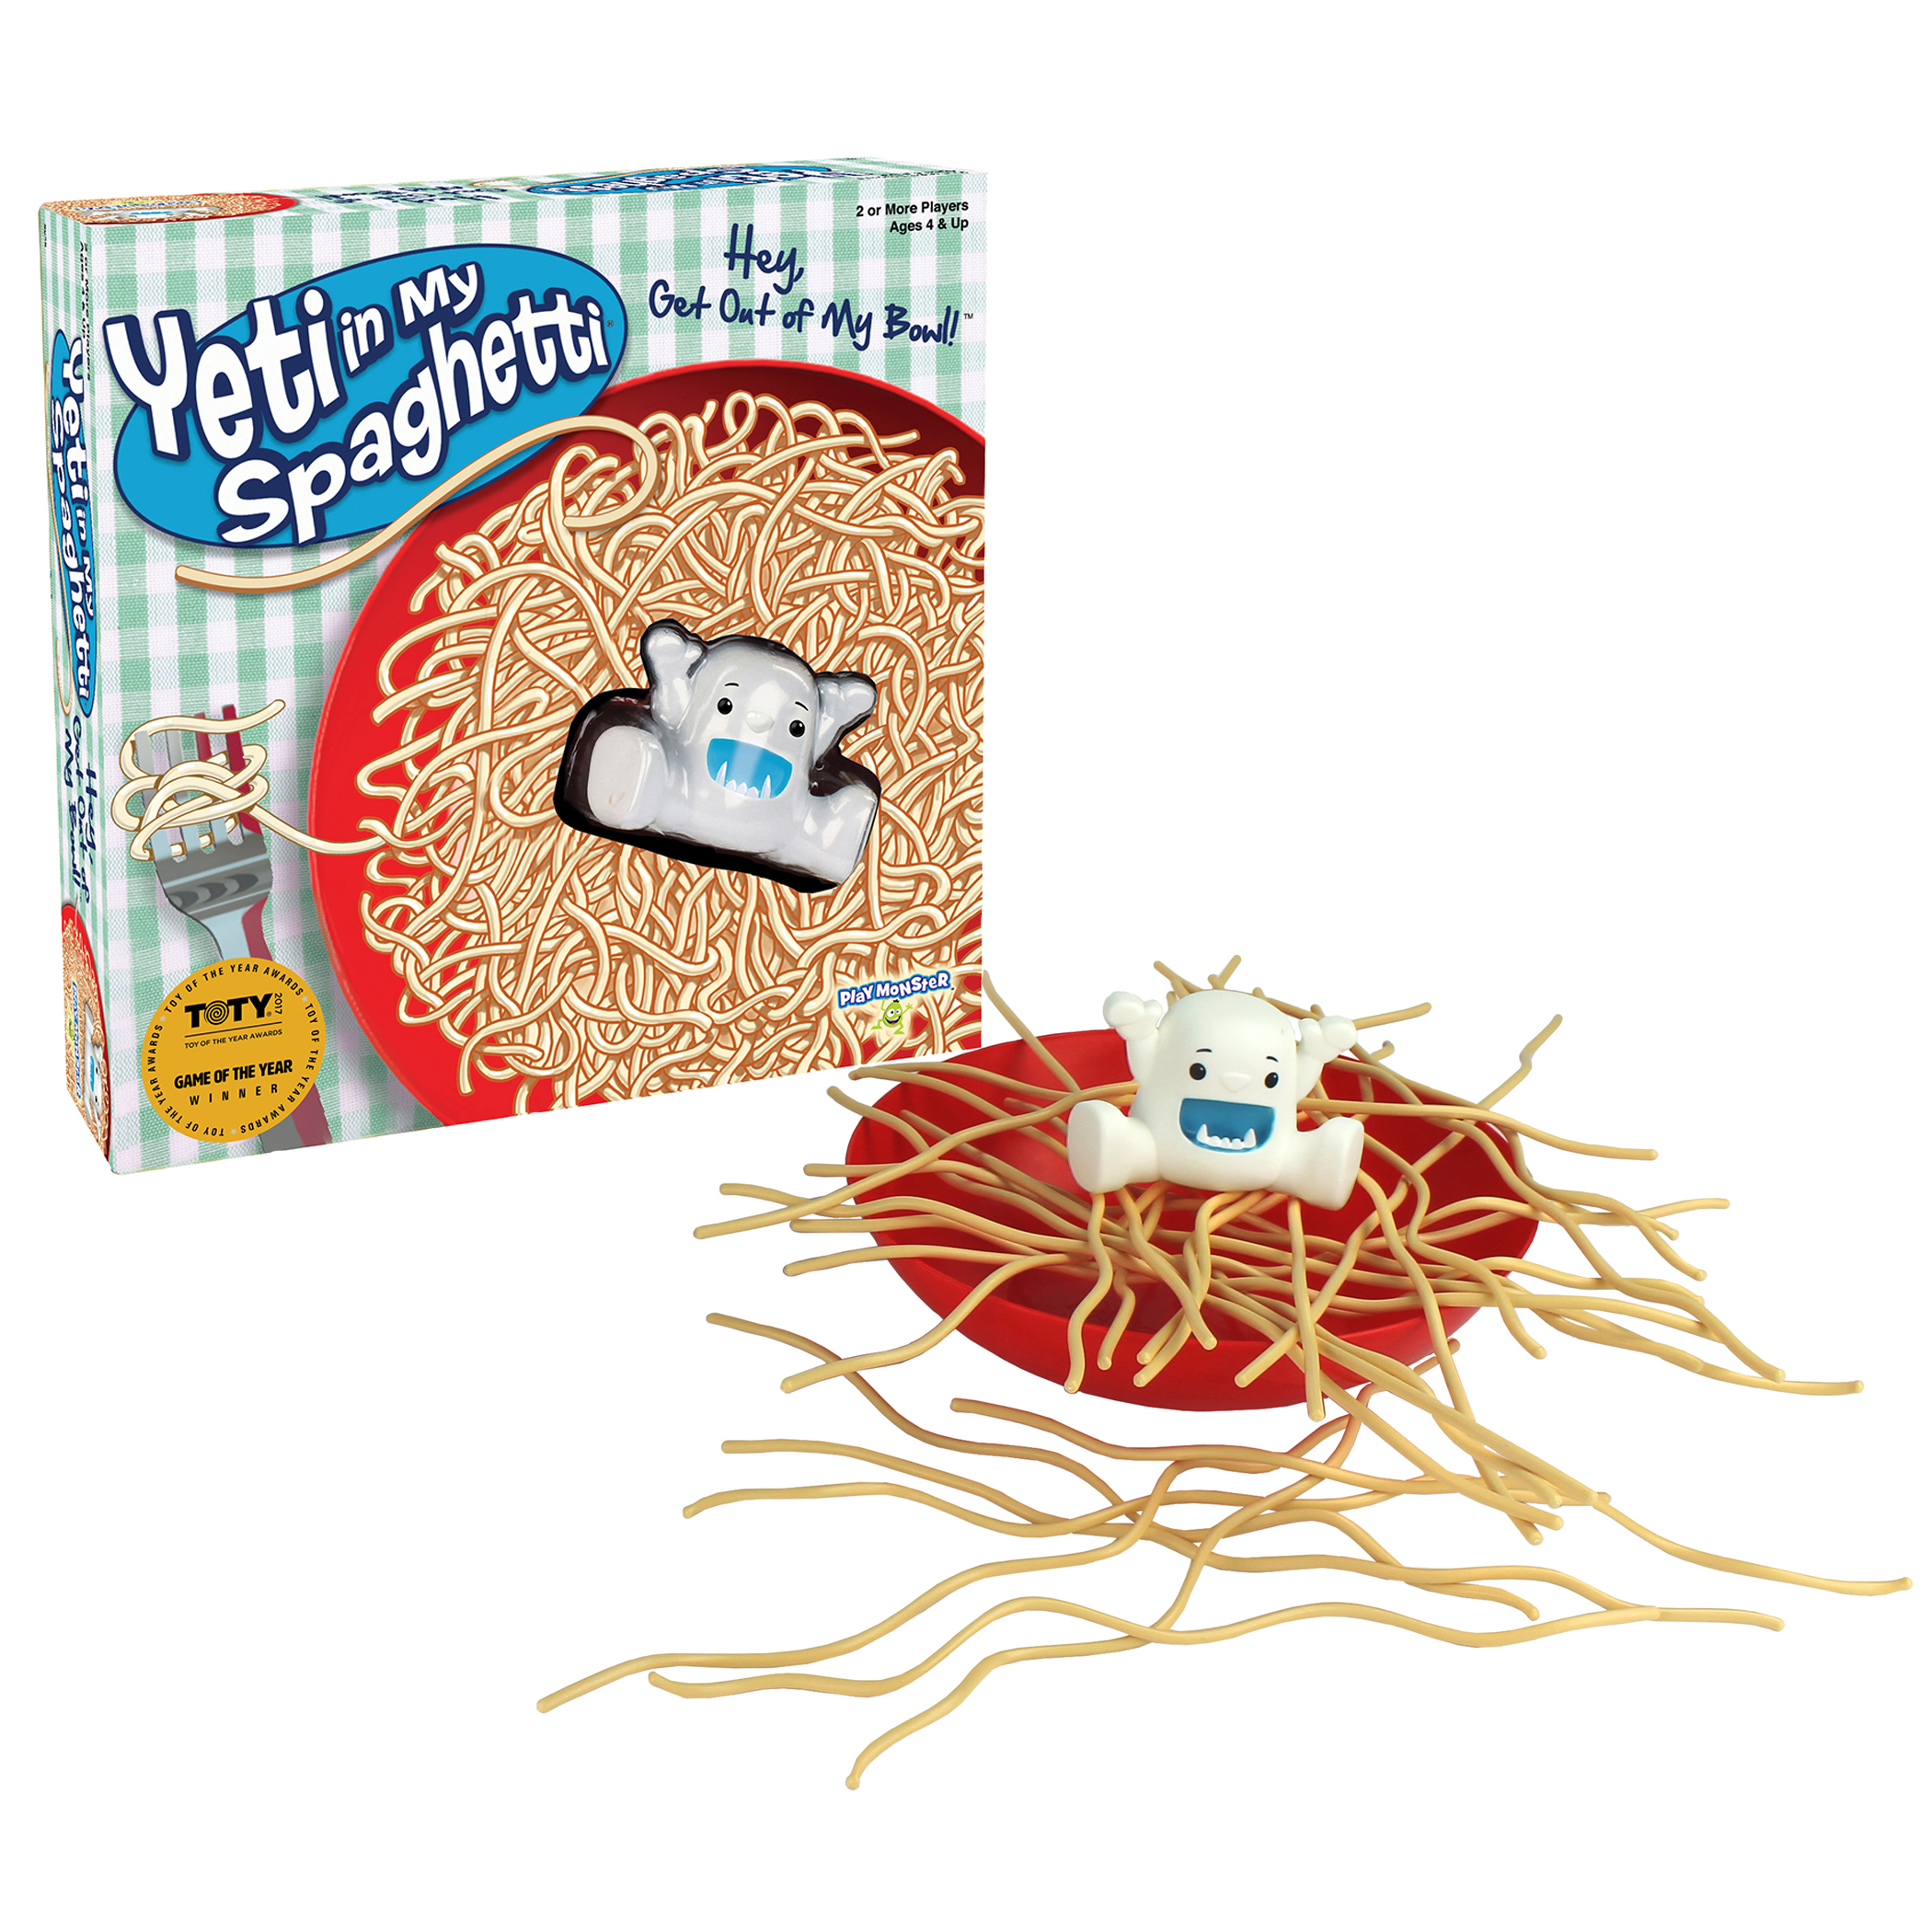 PlayMonster Yeti in My Spaghetti Hey, Get Out of My Bowl! Game - image 1 of 2